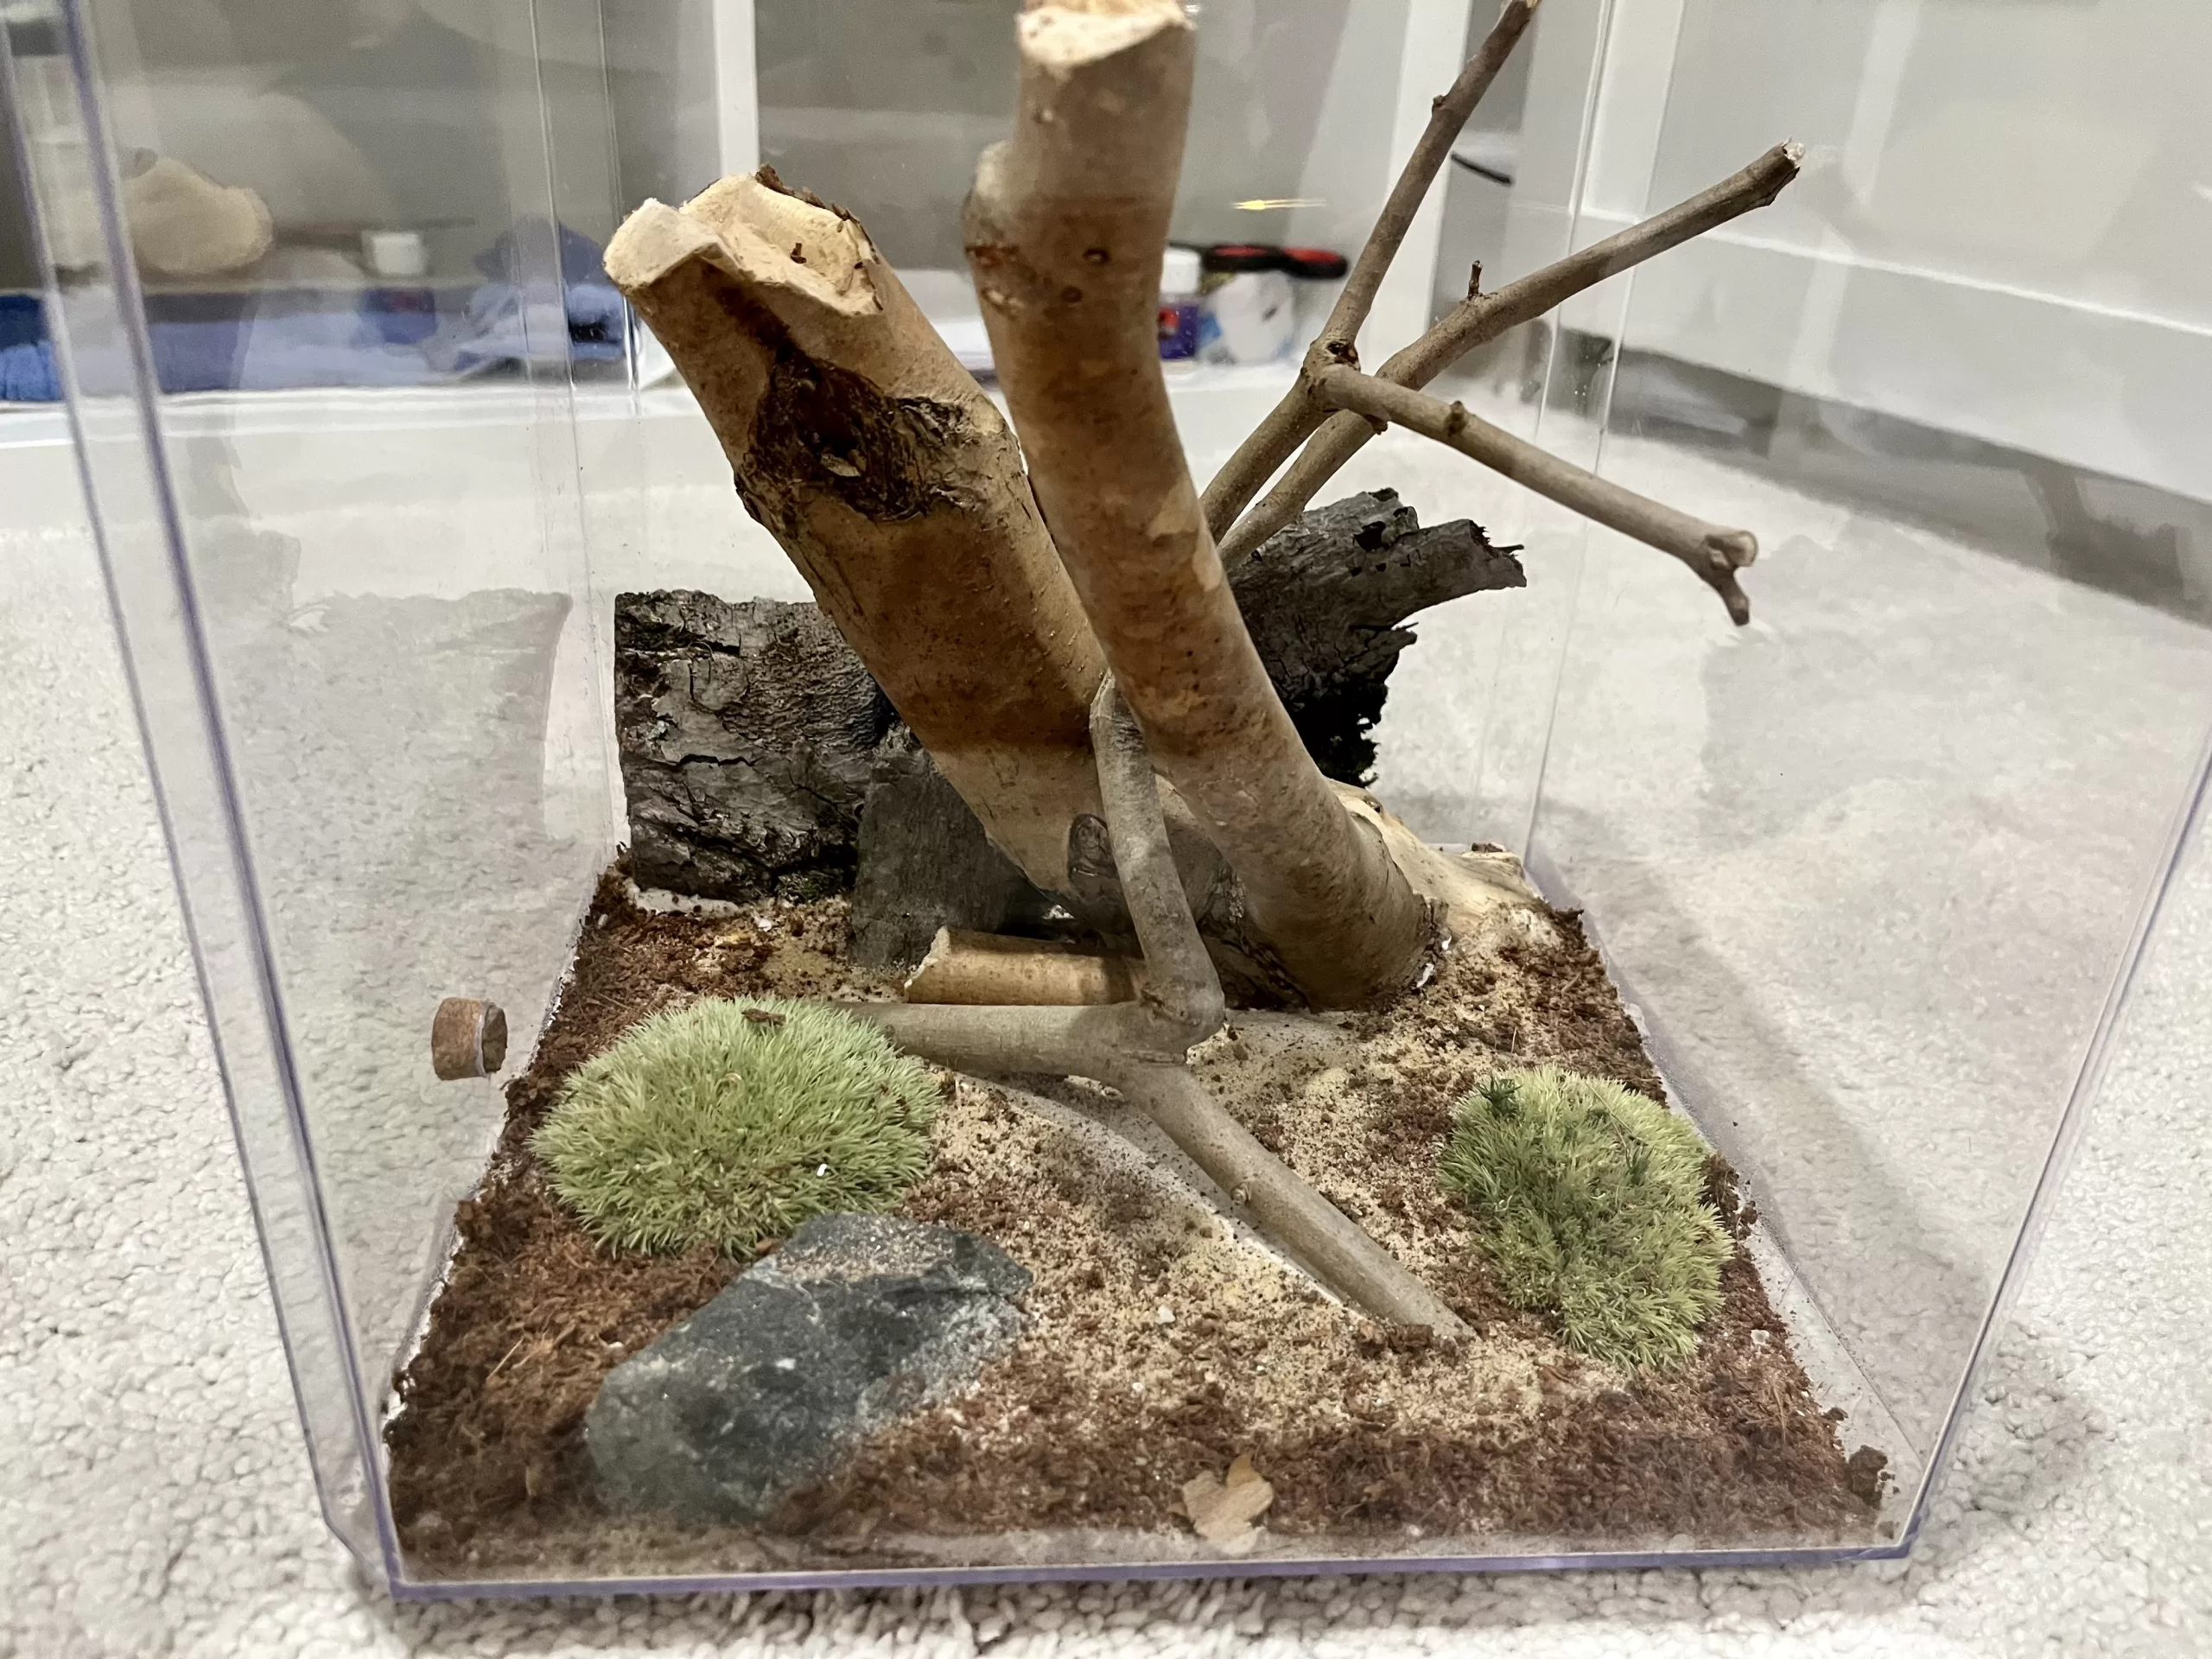 A woodland themed outworld made by kiedeerk#2768 in a 10" cube container.